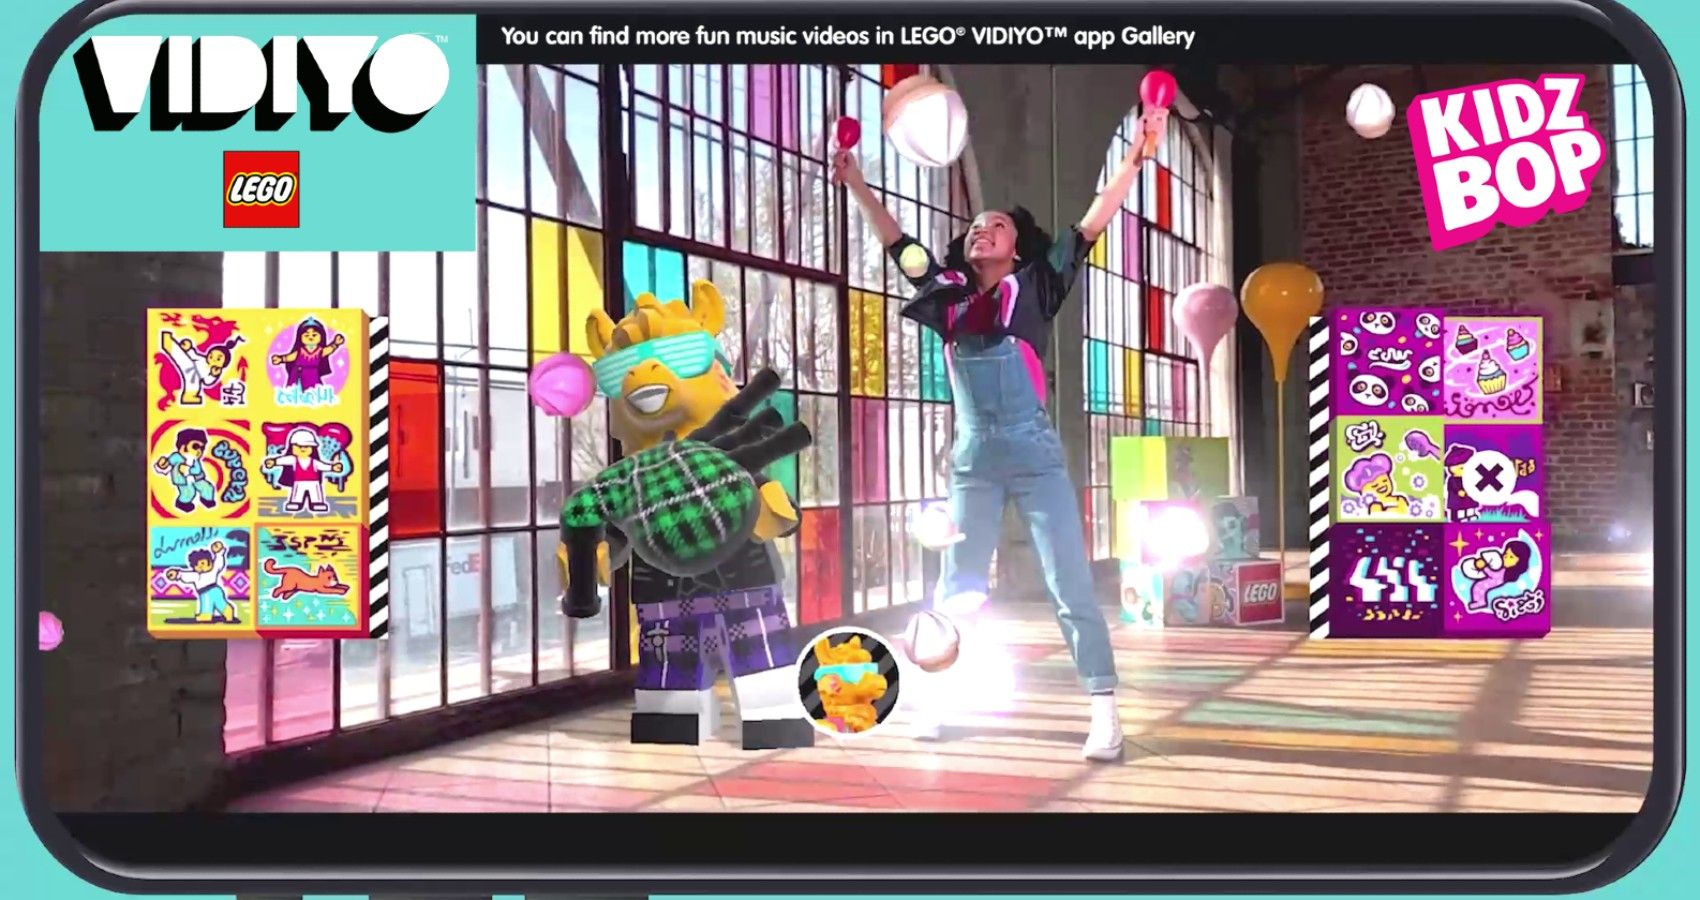 A screen shot of the new sweepstakes by kidz bop and lego